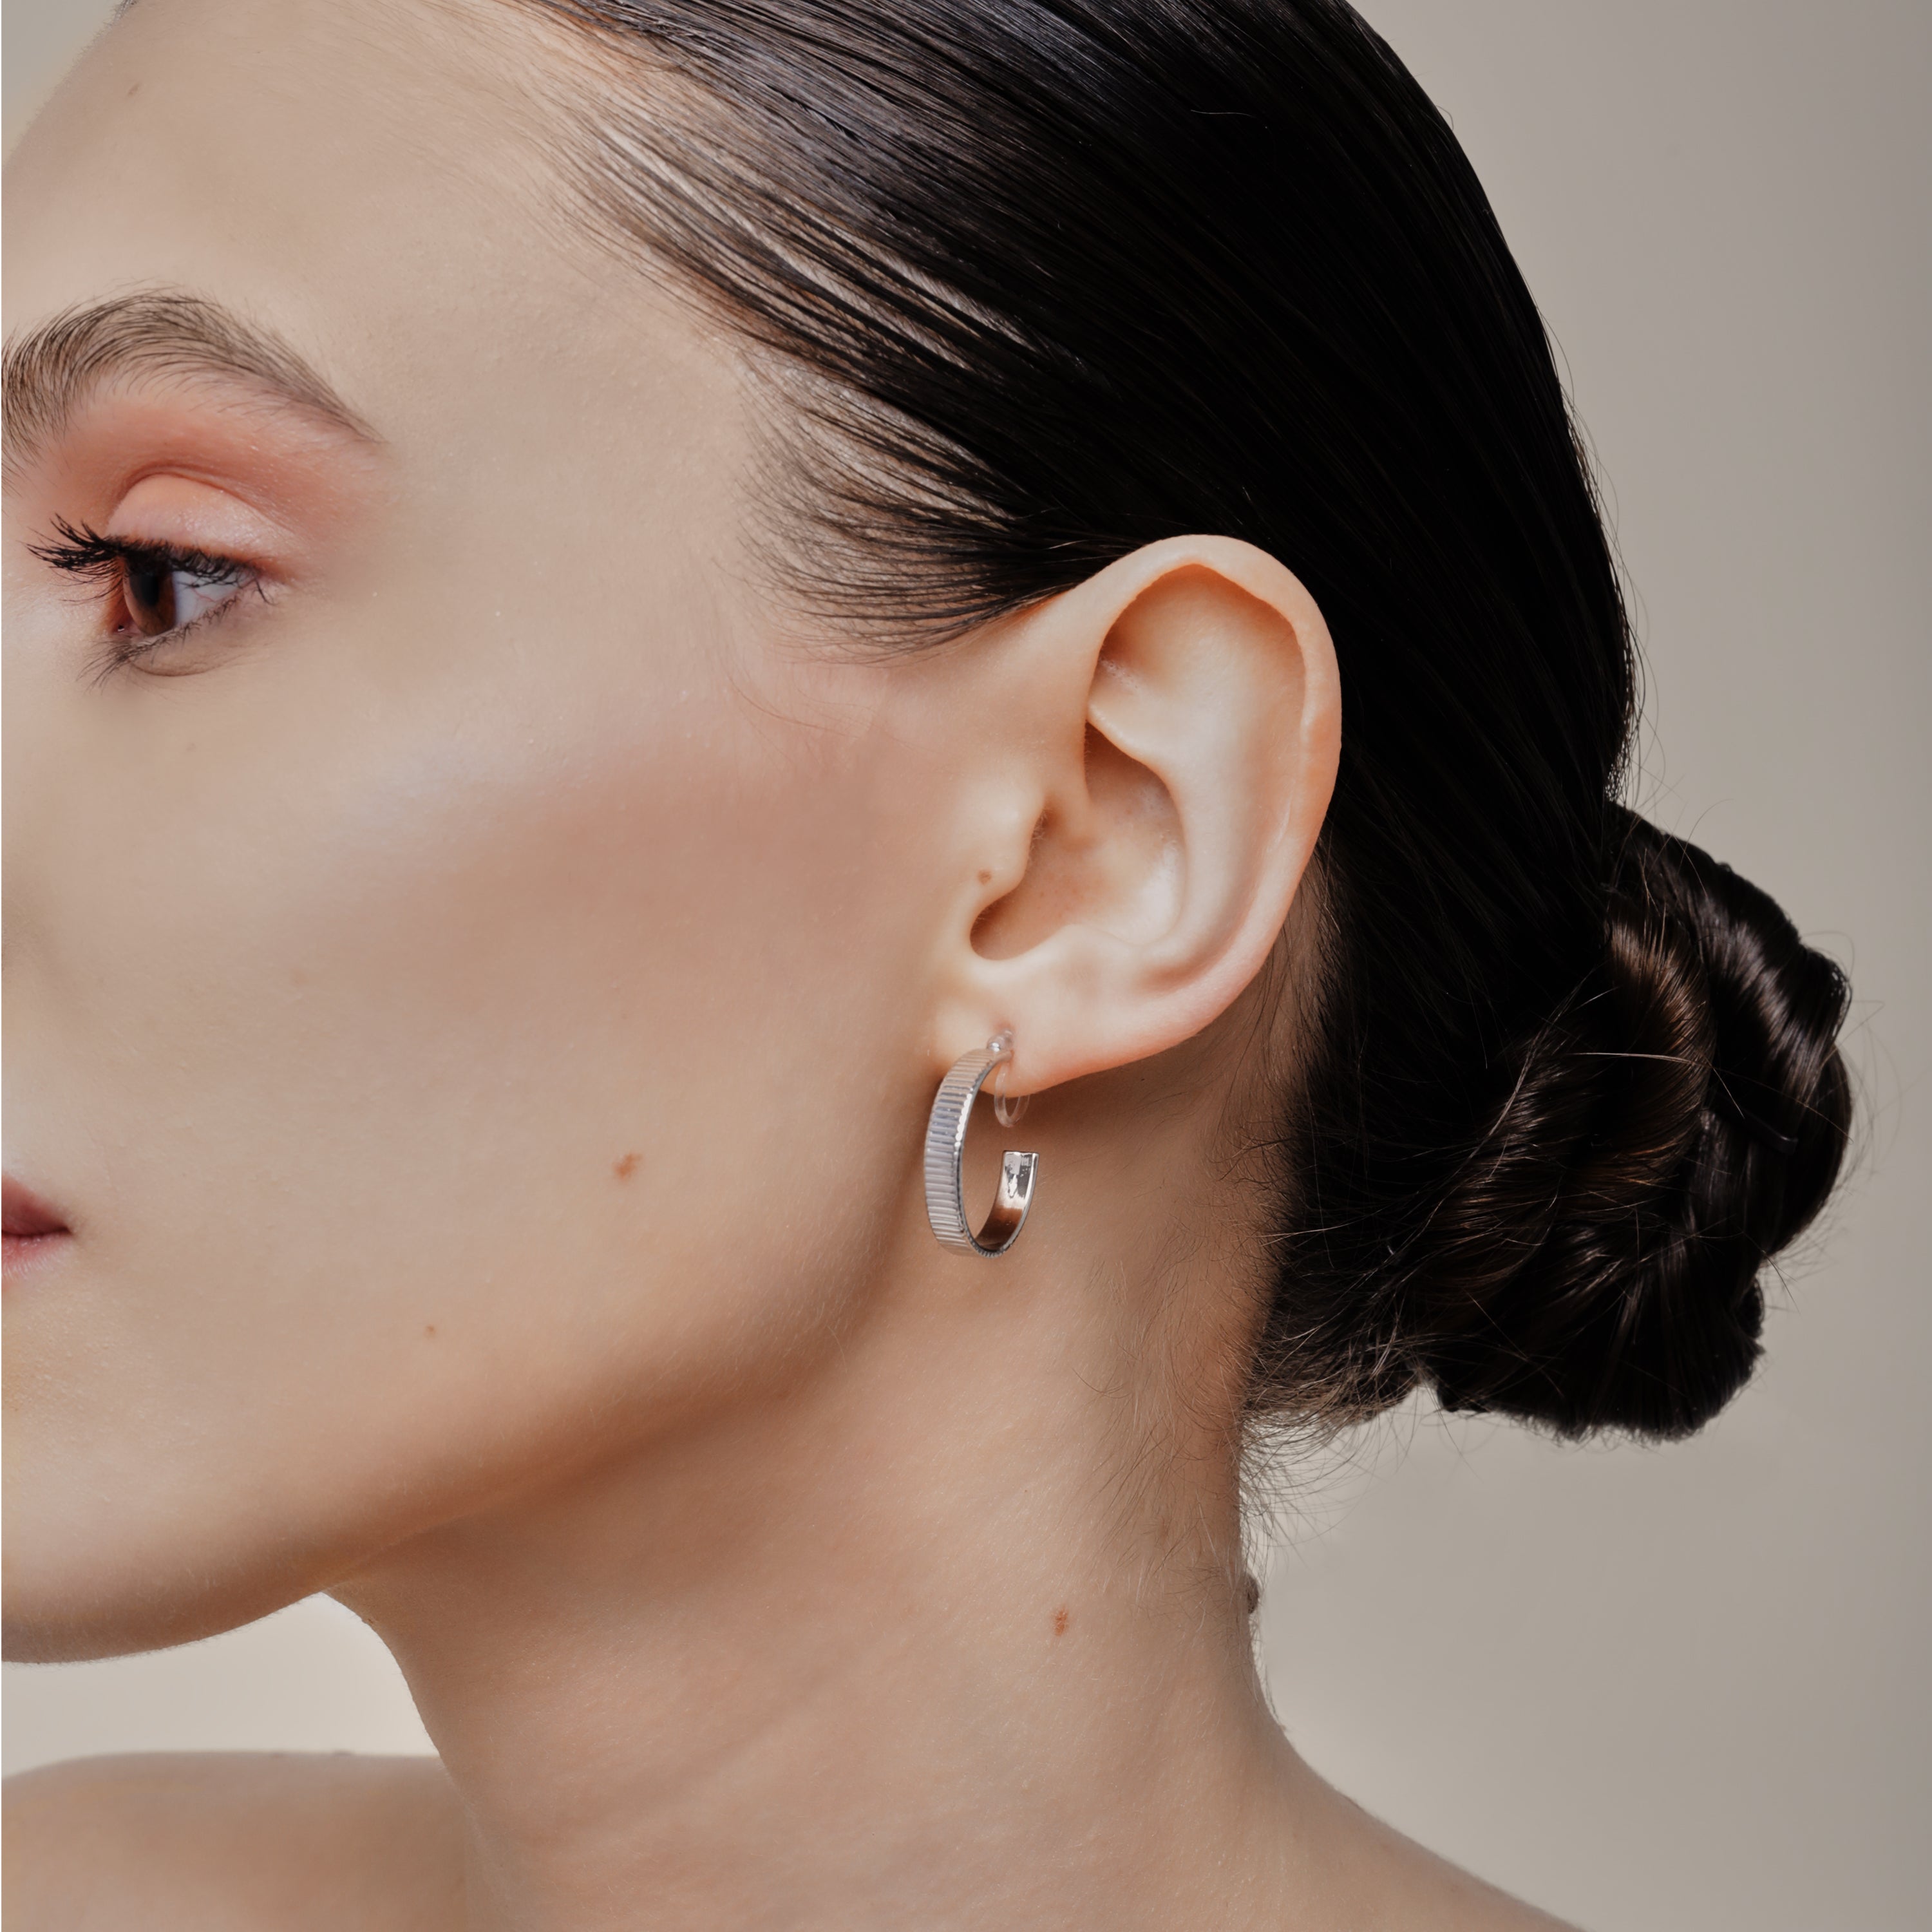 A model wearing the Pleated Hoop Clip On Earrings in Silver offer a resin clip-on closure for a secure and comfortable fit for a variety of ear sizes and sensitivities. With an average wear duration of 8-12 hours, these earrings are perfect for all-day wear. Please note that this listing is for a single pair